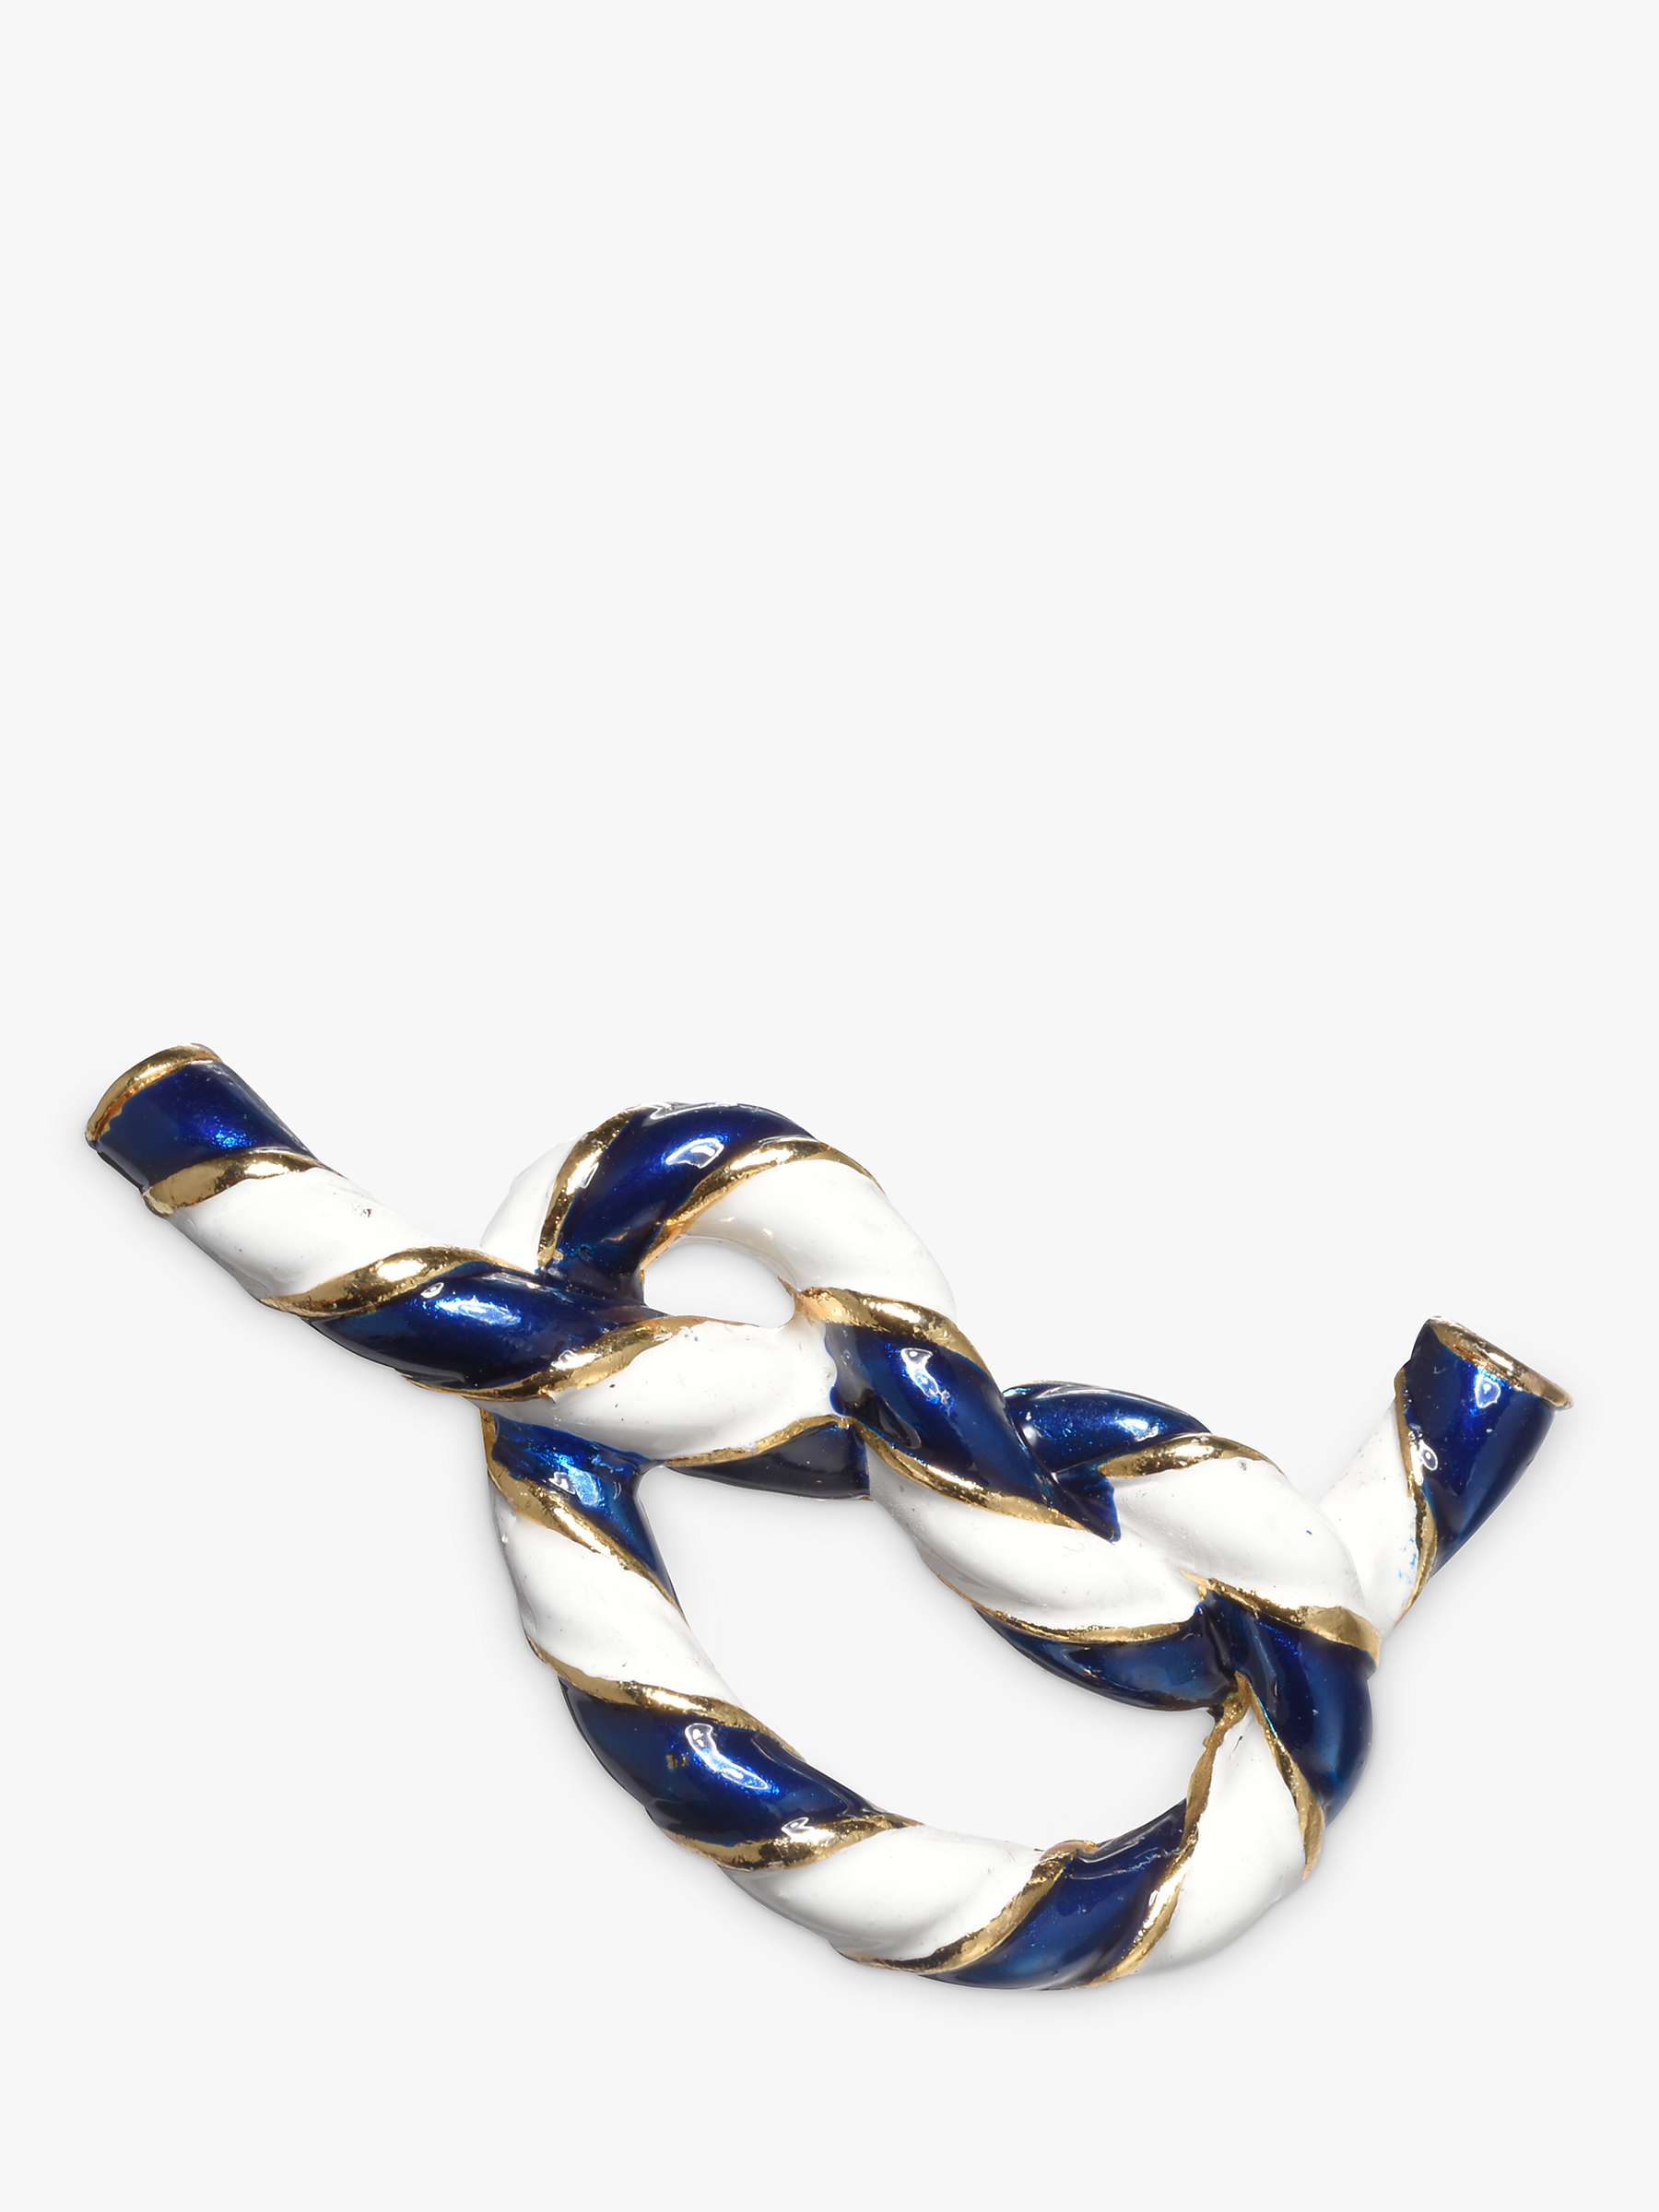 Buy Eclectica Vintage Gold Plated Nautical Enamel Brooch, Dated Circa 1970s, Blue Online at johnlewis.com